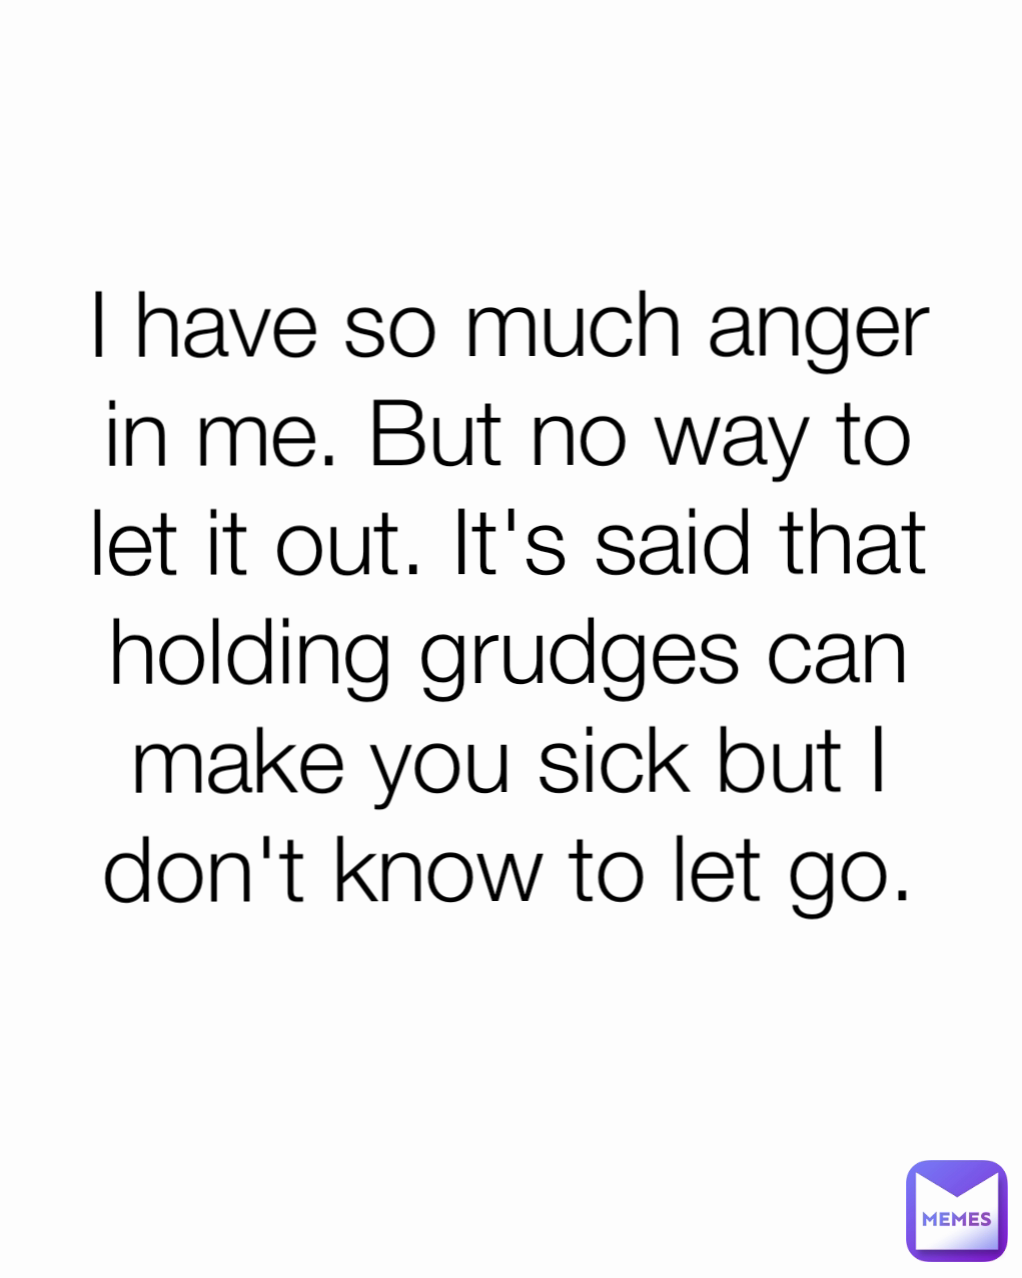 I have so much anger in me. But no way to let it out. It's said that holding grudges can make you sick but I don't know to let go.